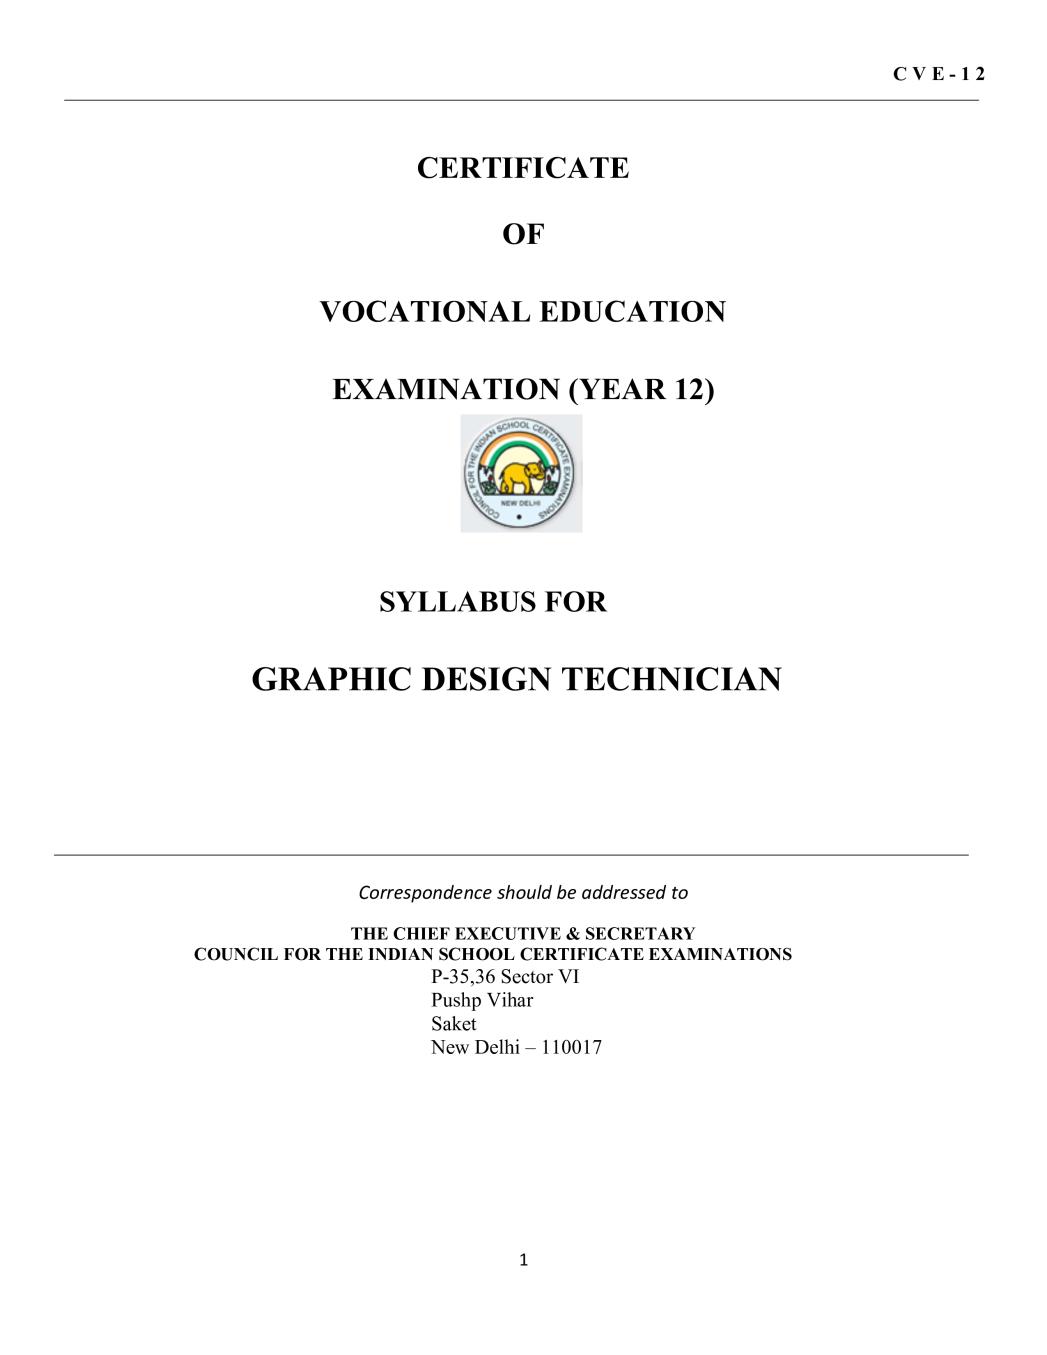 ISC Class 12 Graphic Design Technician Syllabus (Vocational Course) - Page 1